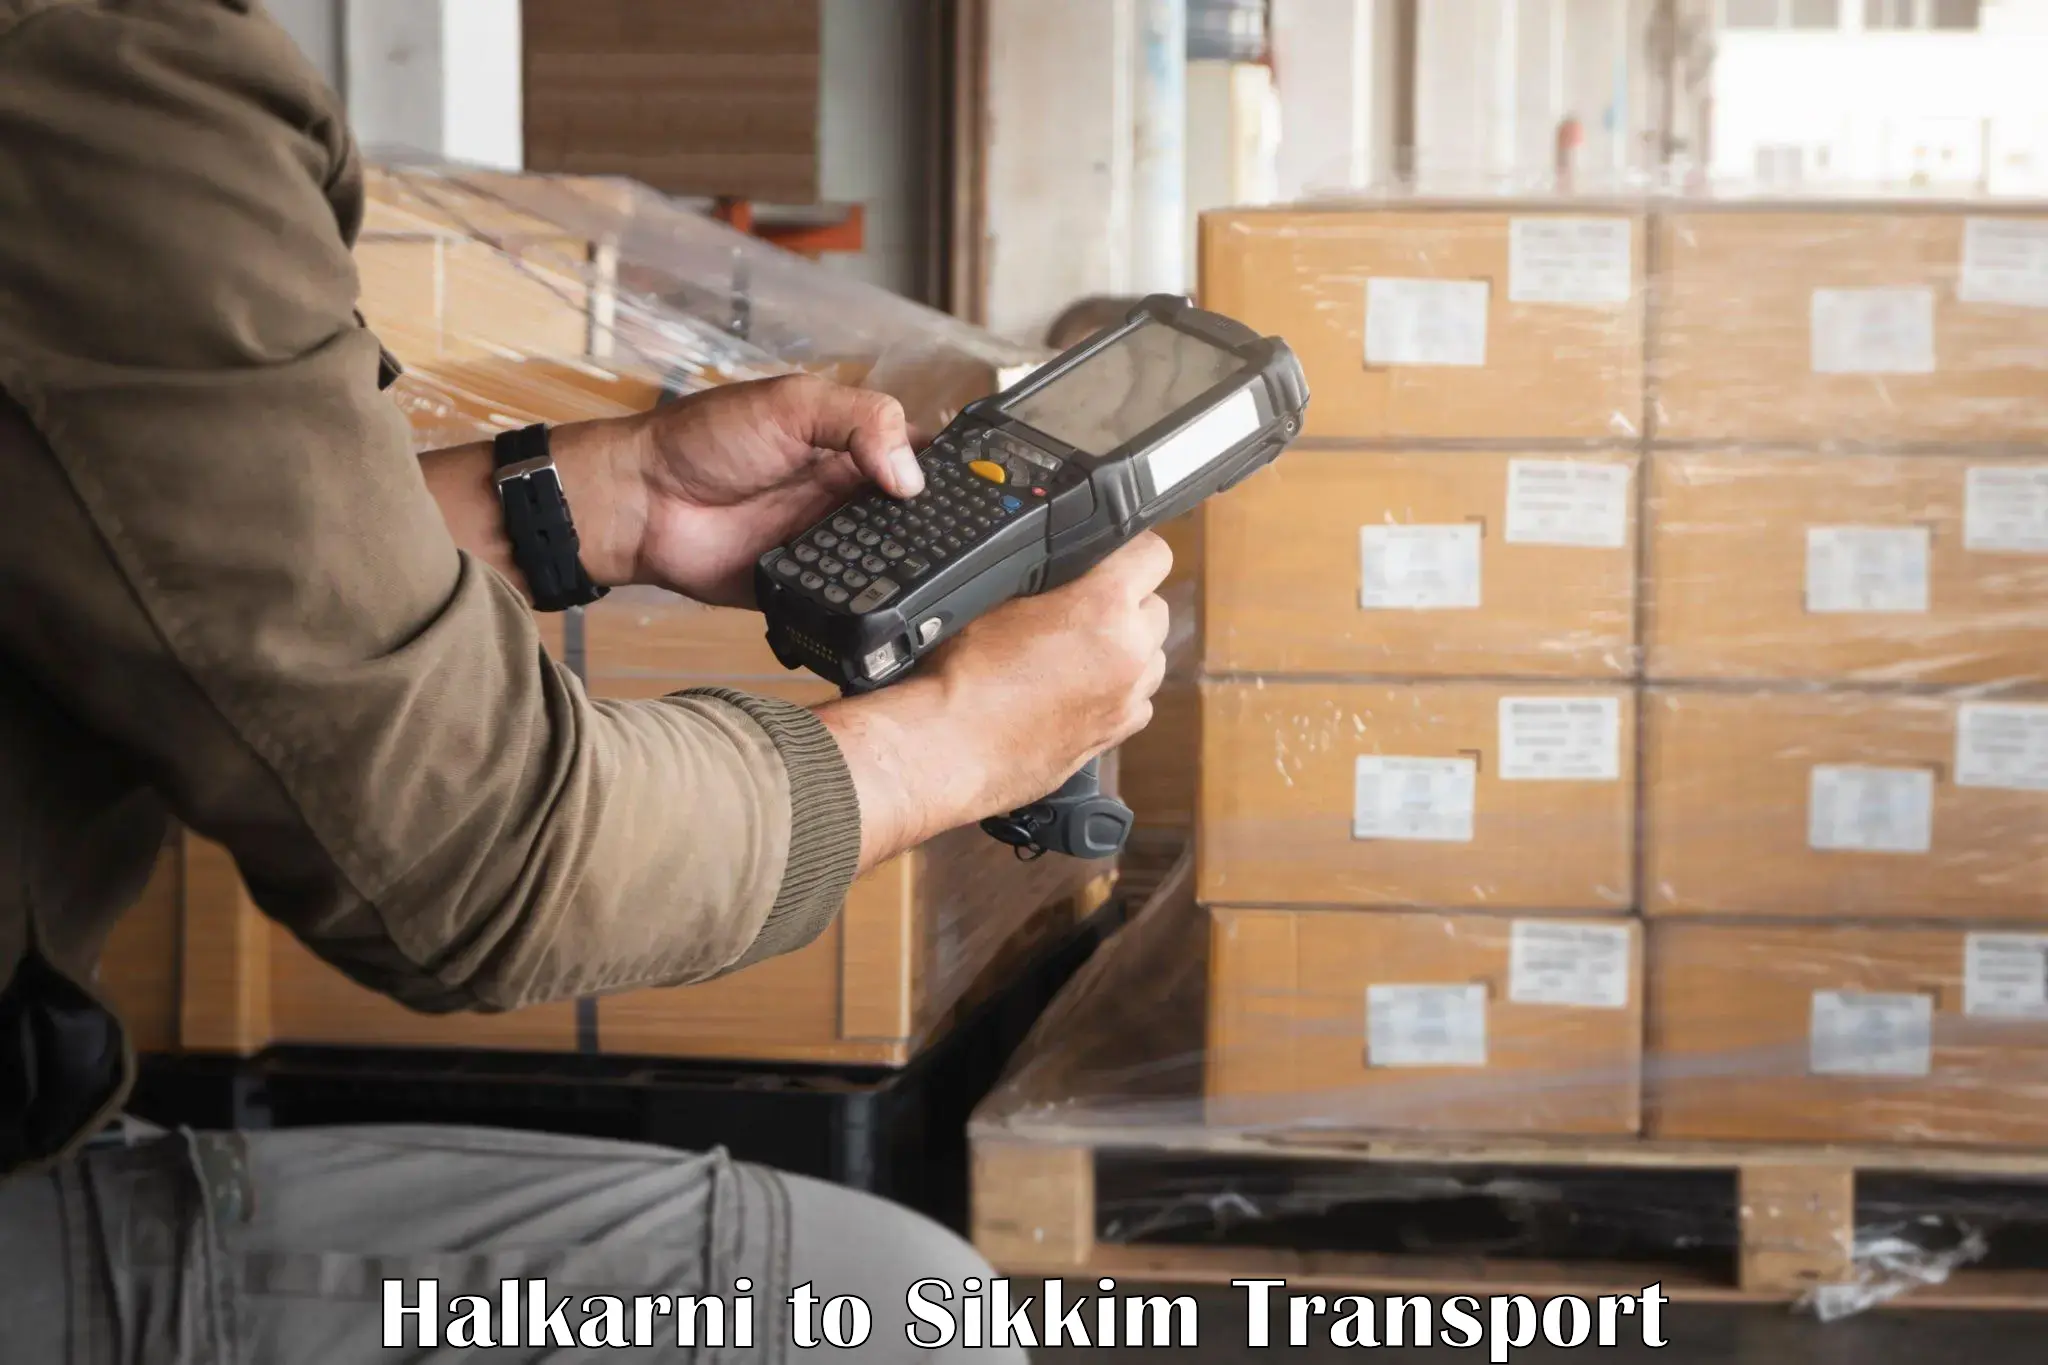 Shipping services Halkarni to Pelling